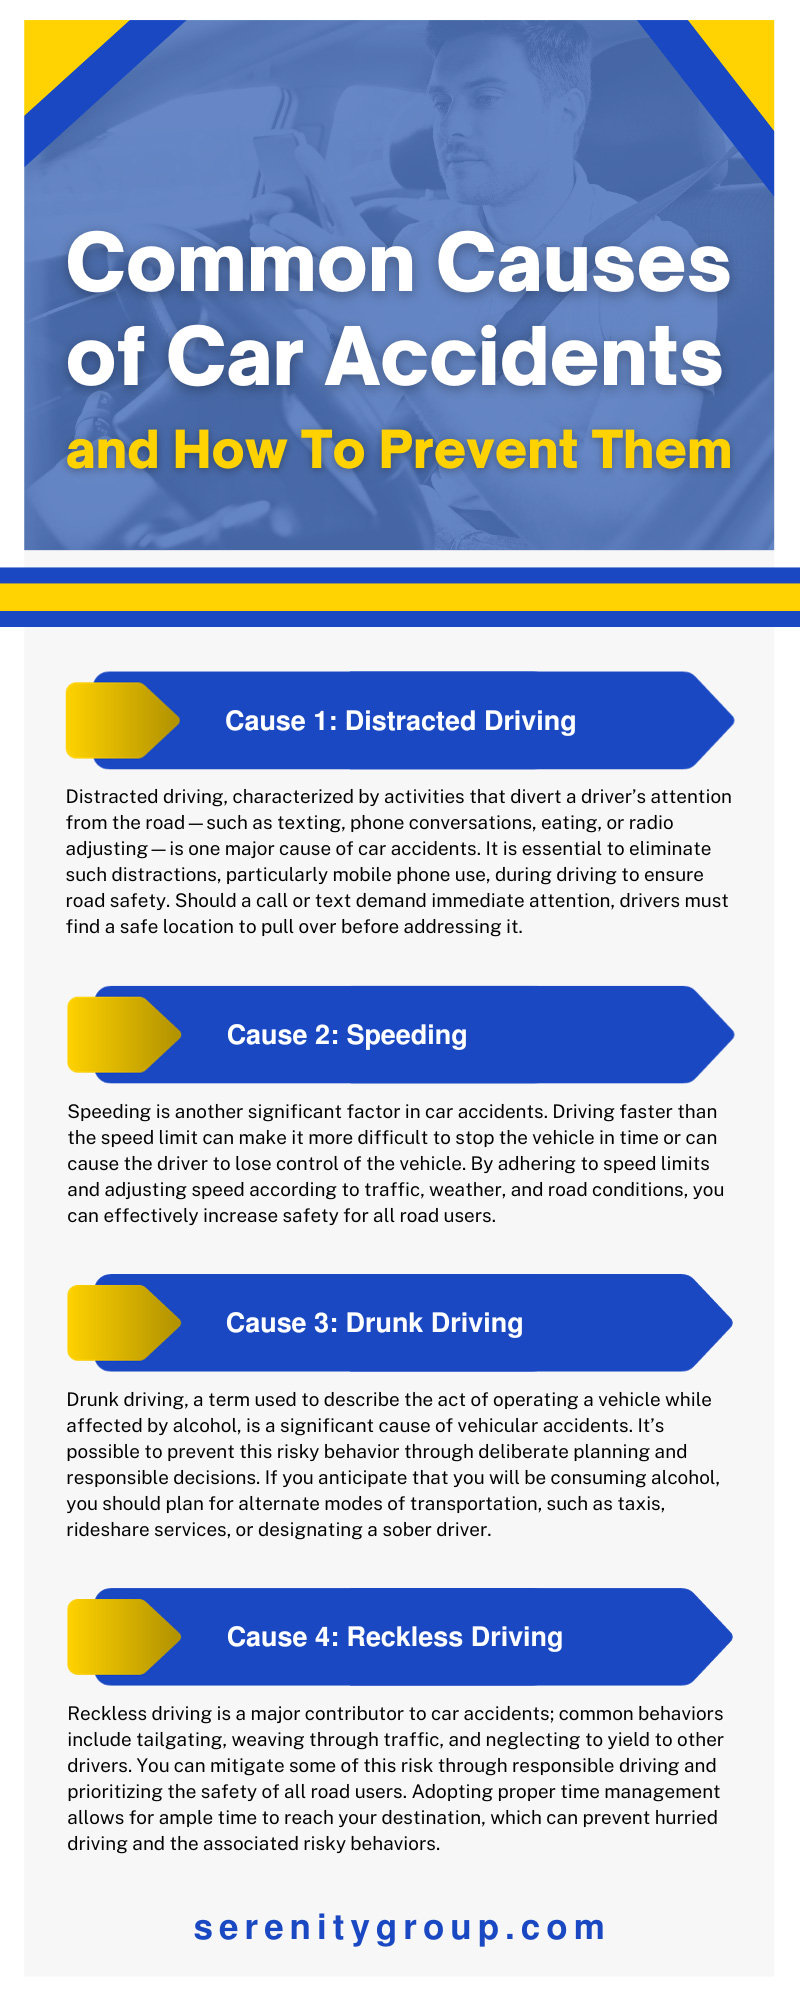 12 Common Causes of Car Accidents and How To Prevent Them